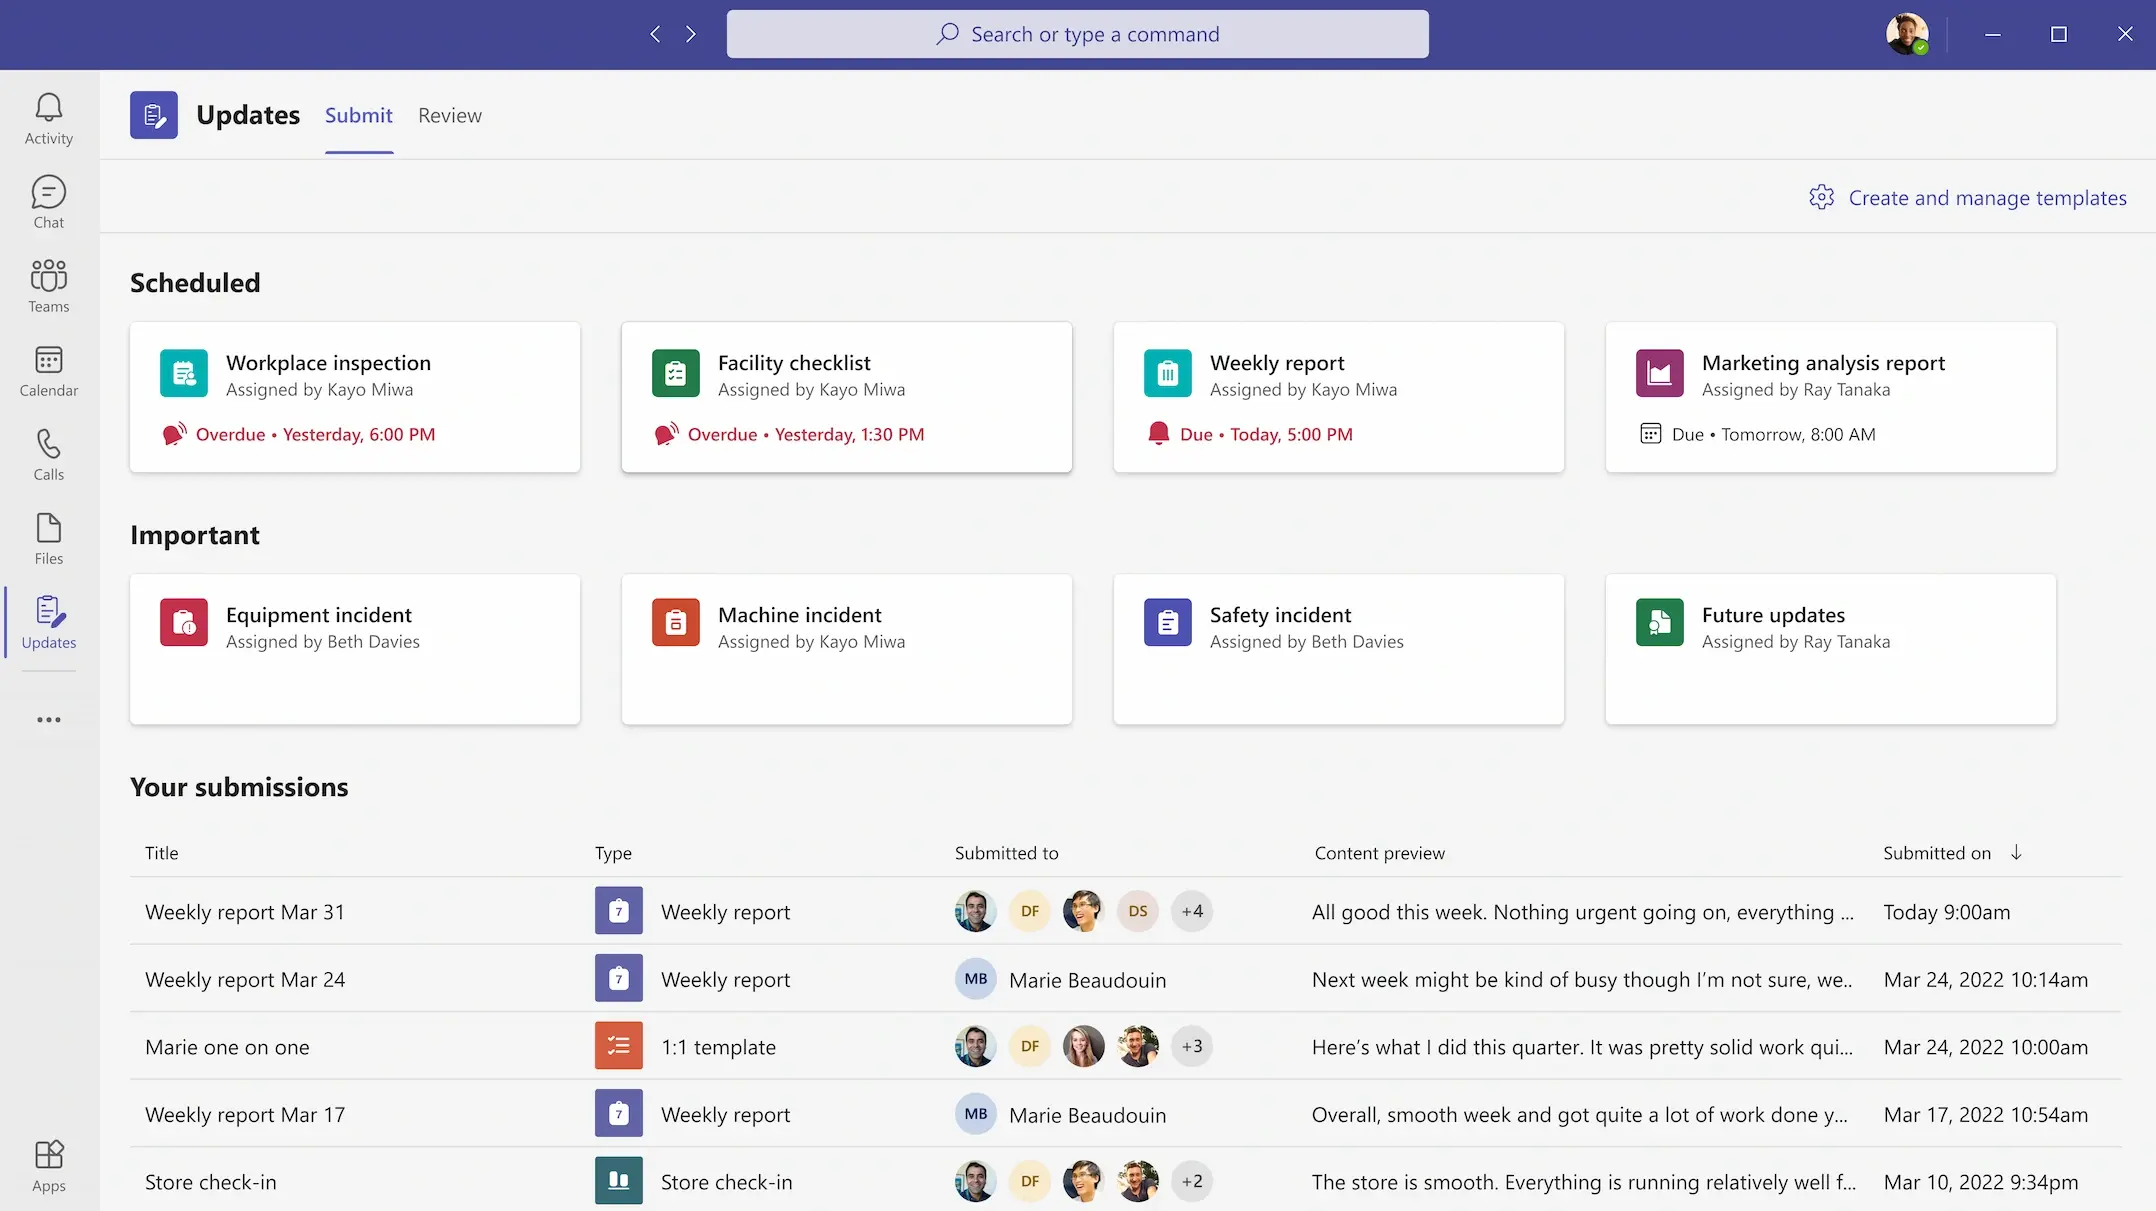 Microsoft Teams display panel presenting scheduled meetins and other details